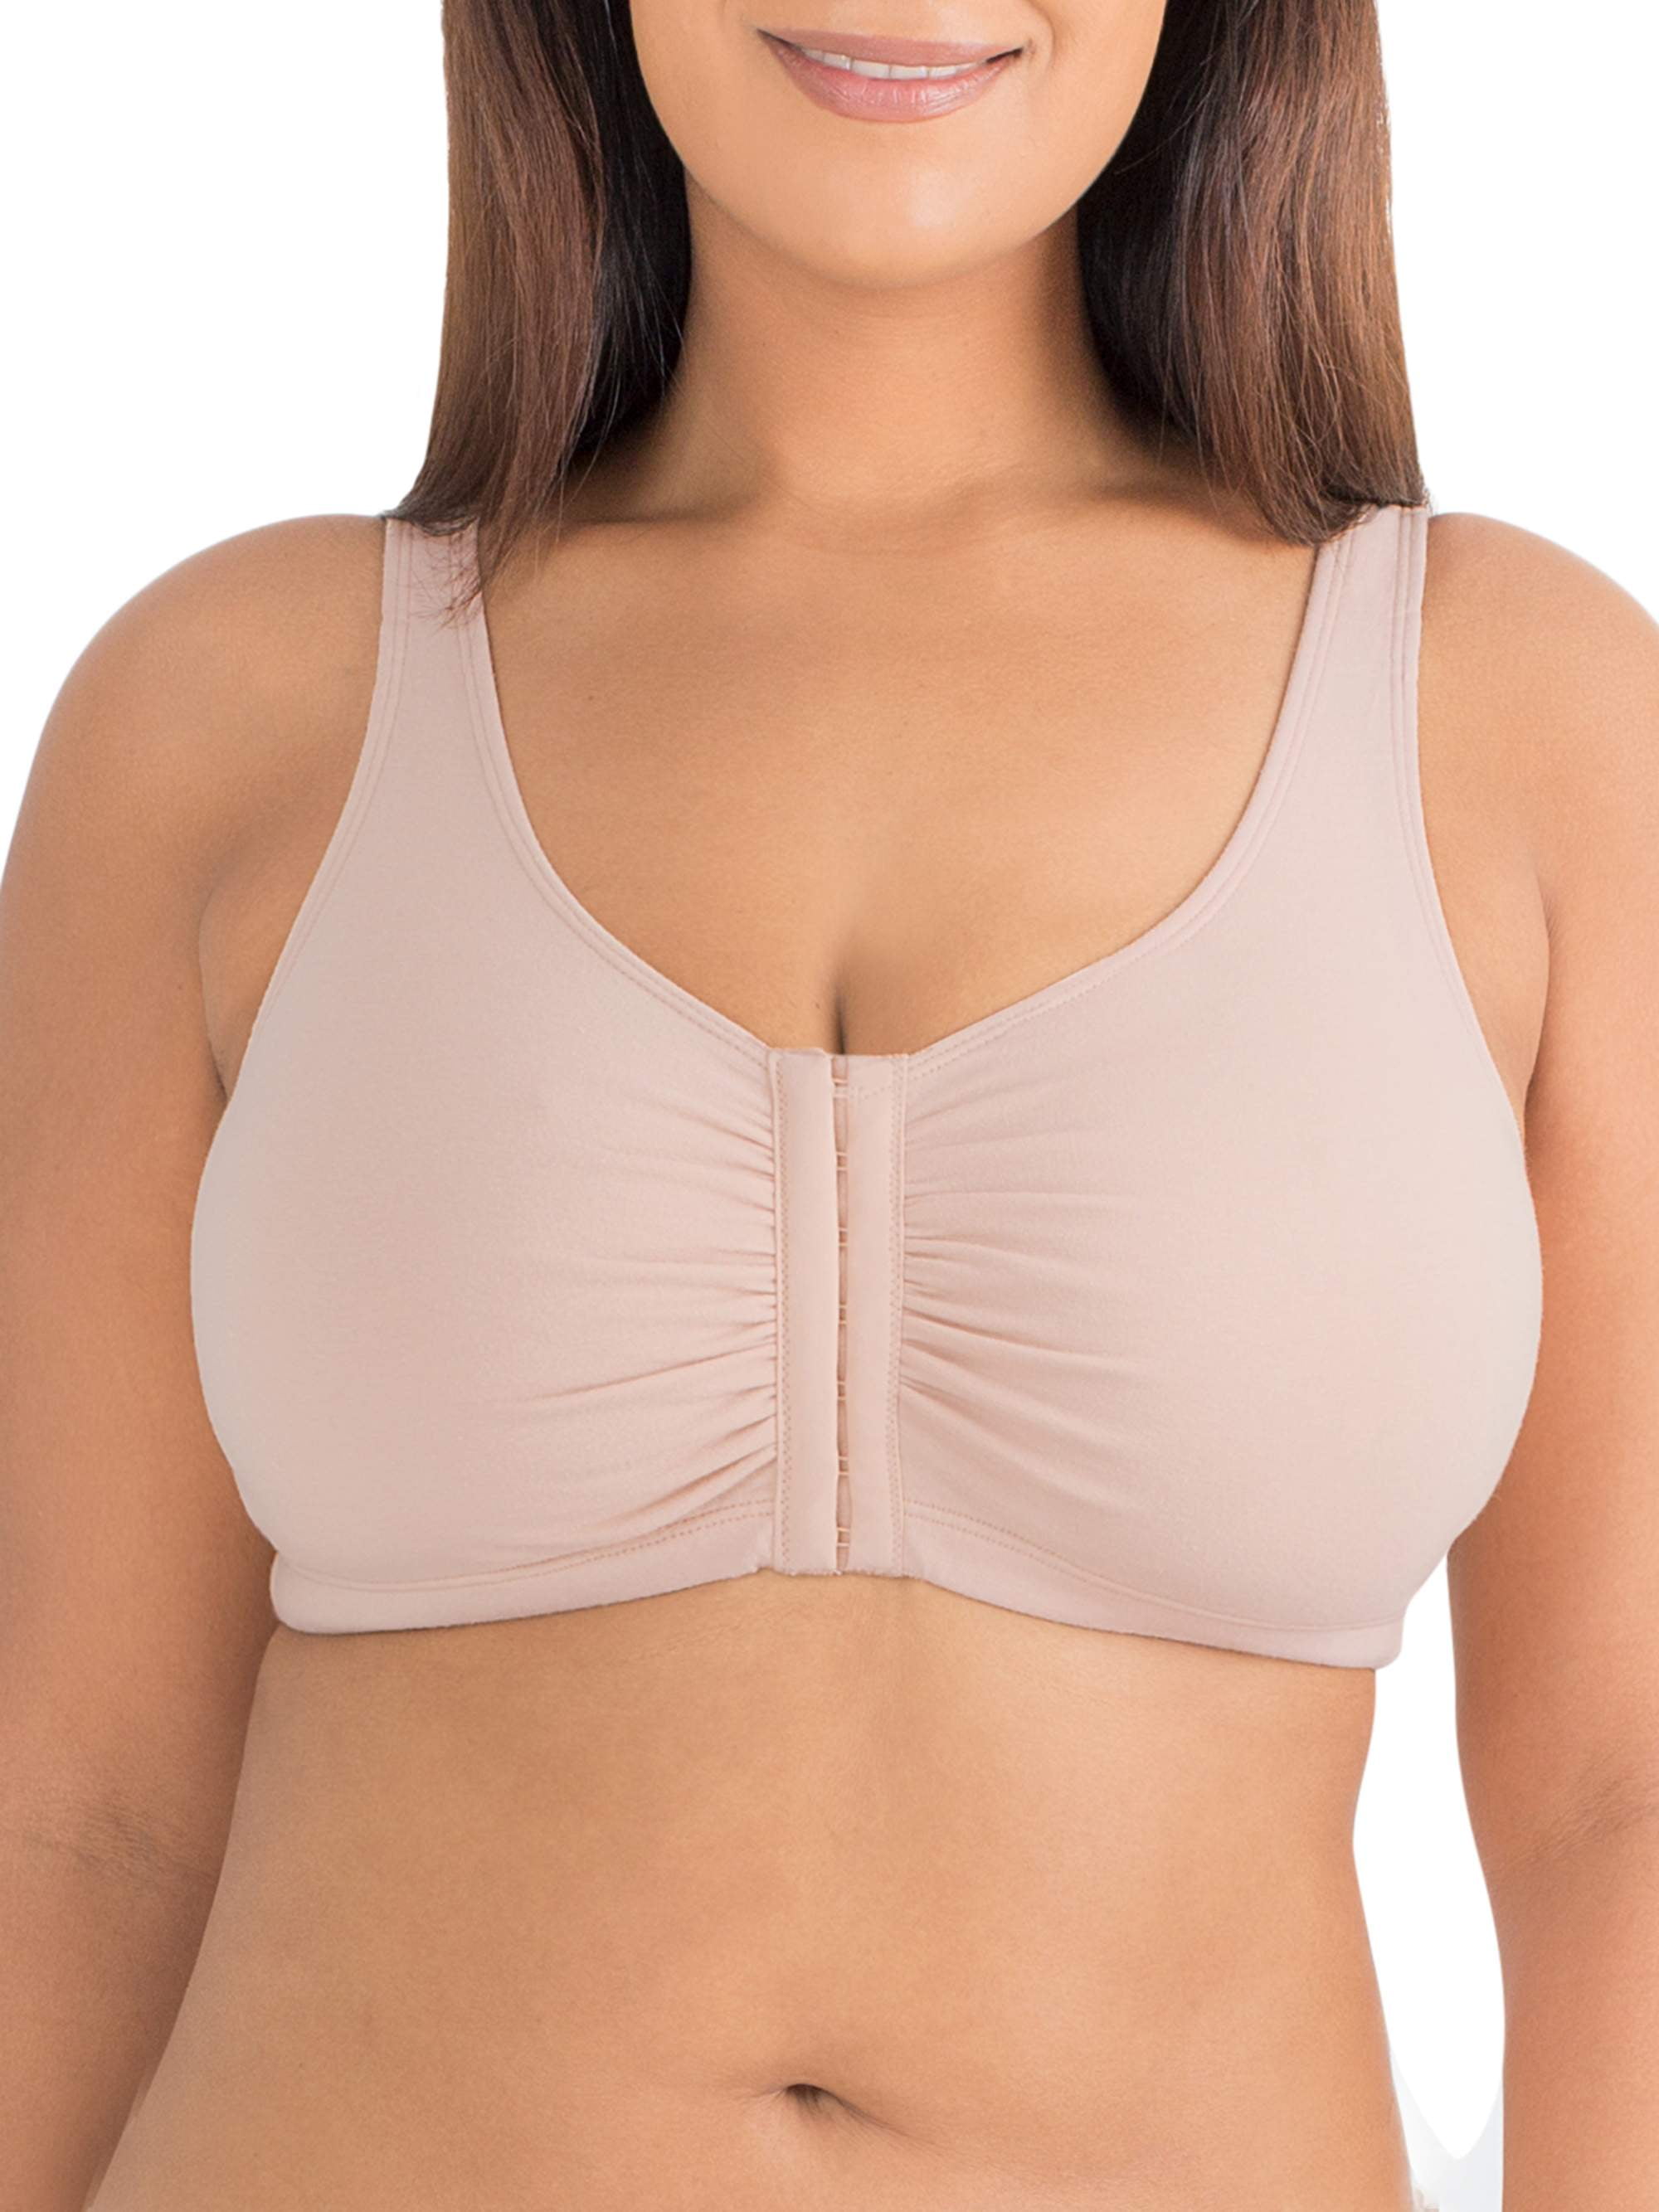 Fruit of the Loom Women/'s Comfort Front Close Sport Bra With Mesh Straps